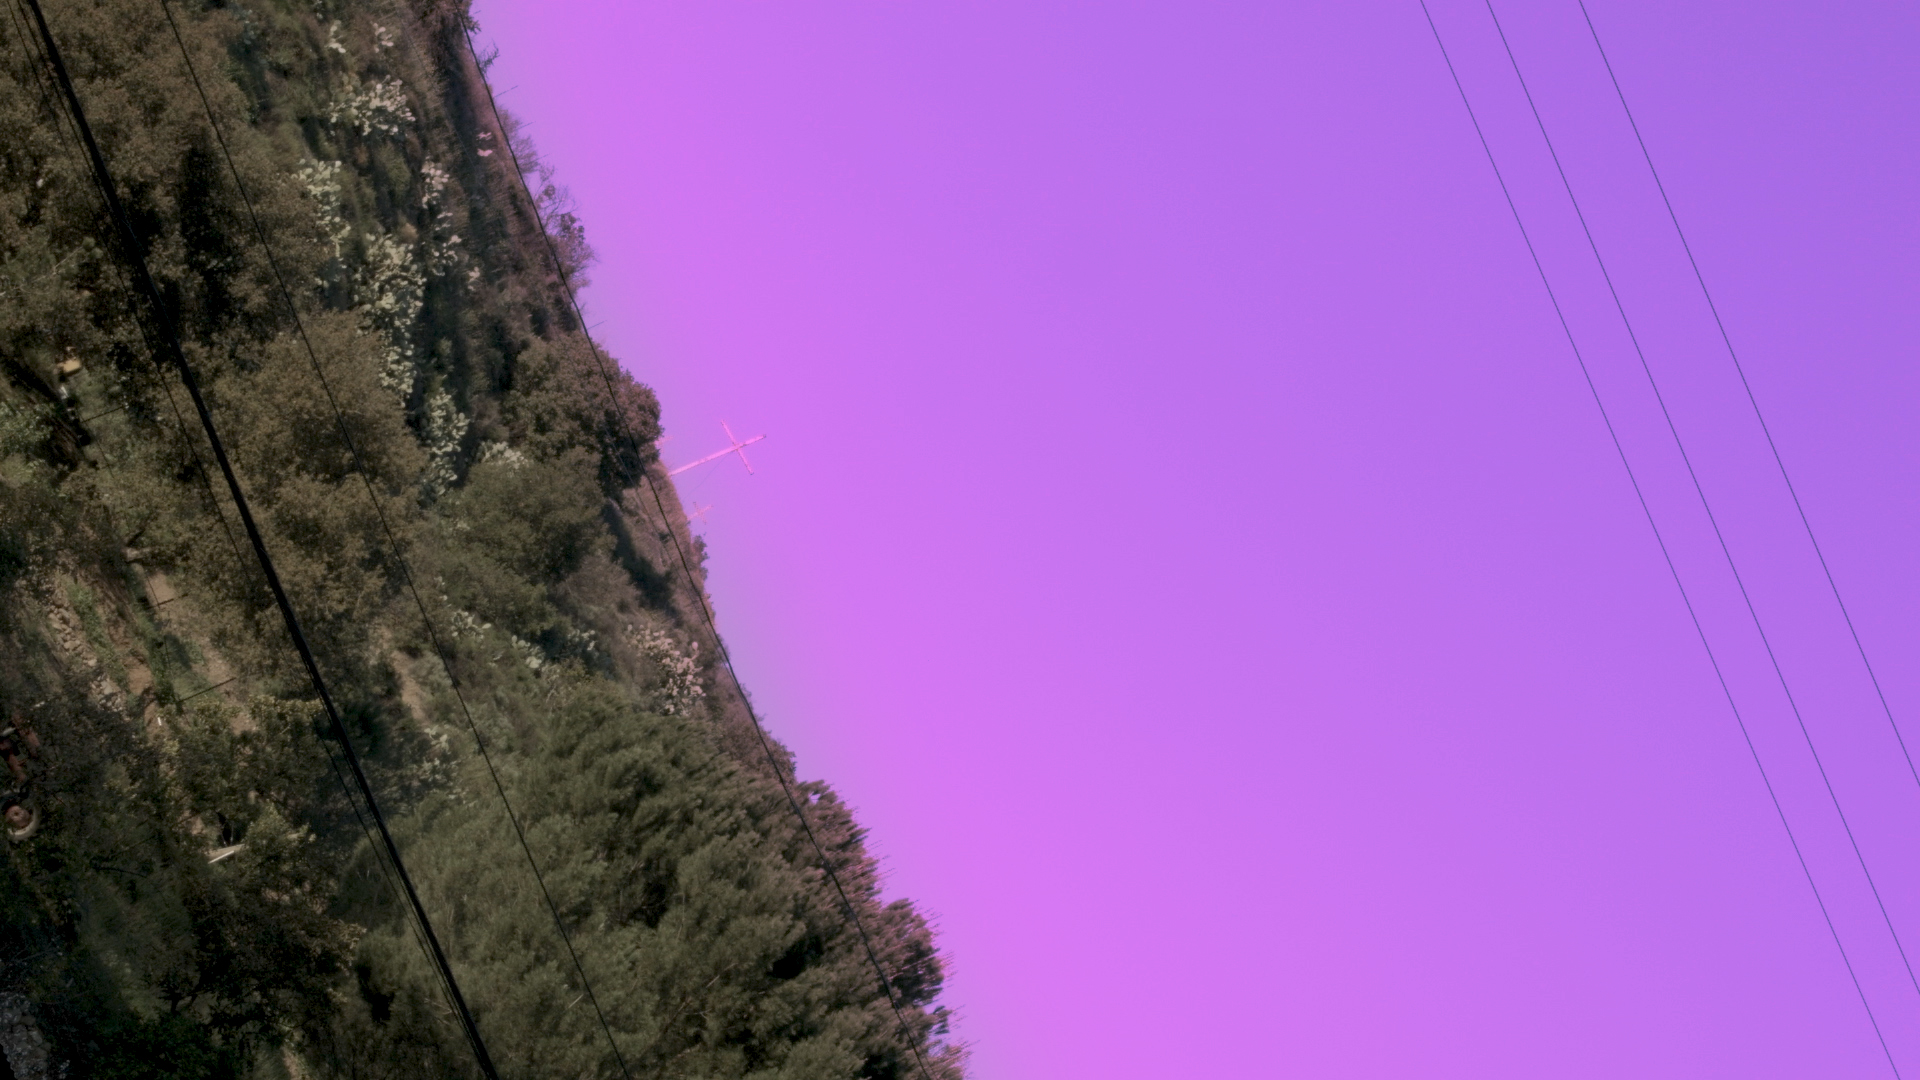 Tilted image of a forest skyline with wires crossing the frame and a hilltop with a cross in the background.